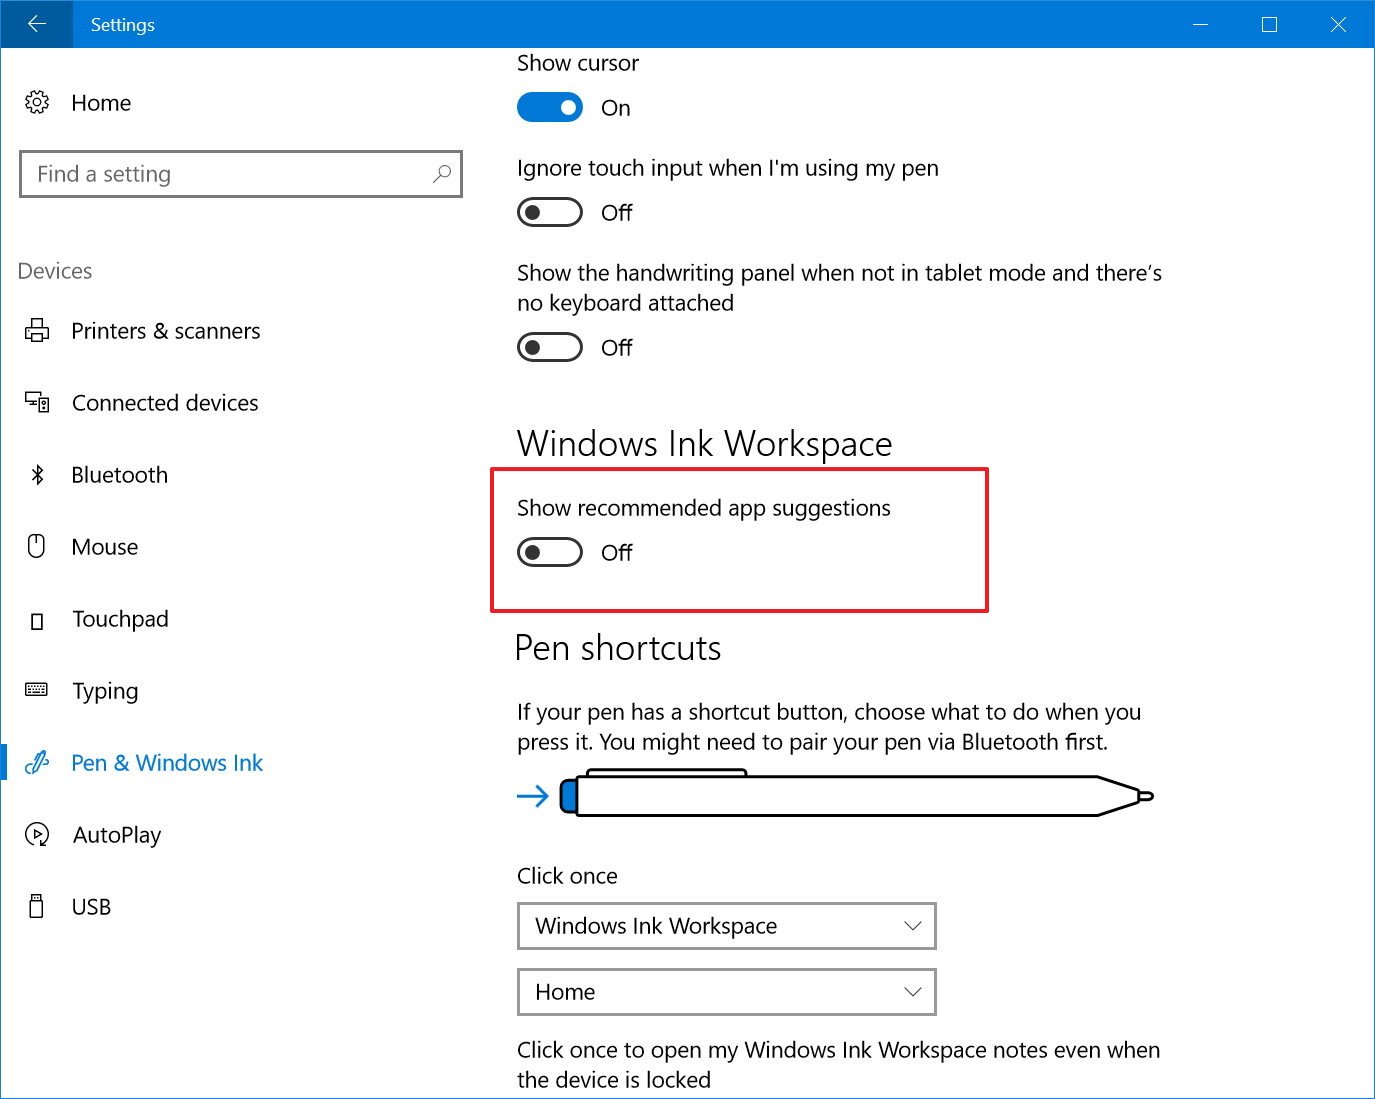 How to remove those nagging ads from Windows 10 | Windows ...